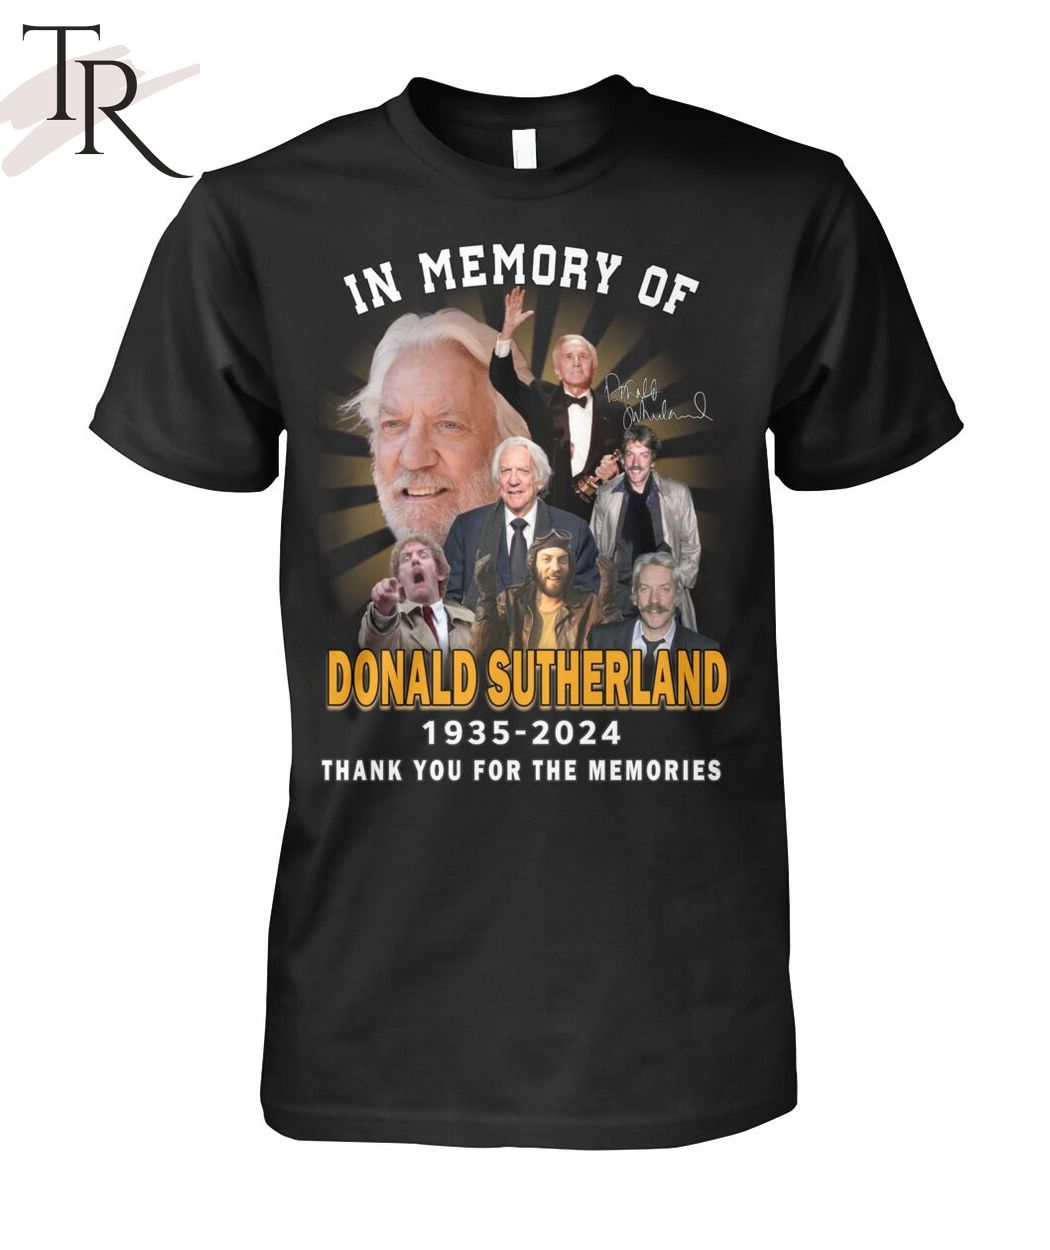 In Memory Of Donald Sutherland 1935-2024 Thank You For The Memories T-Shirt